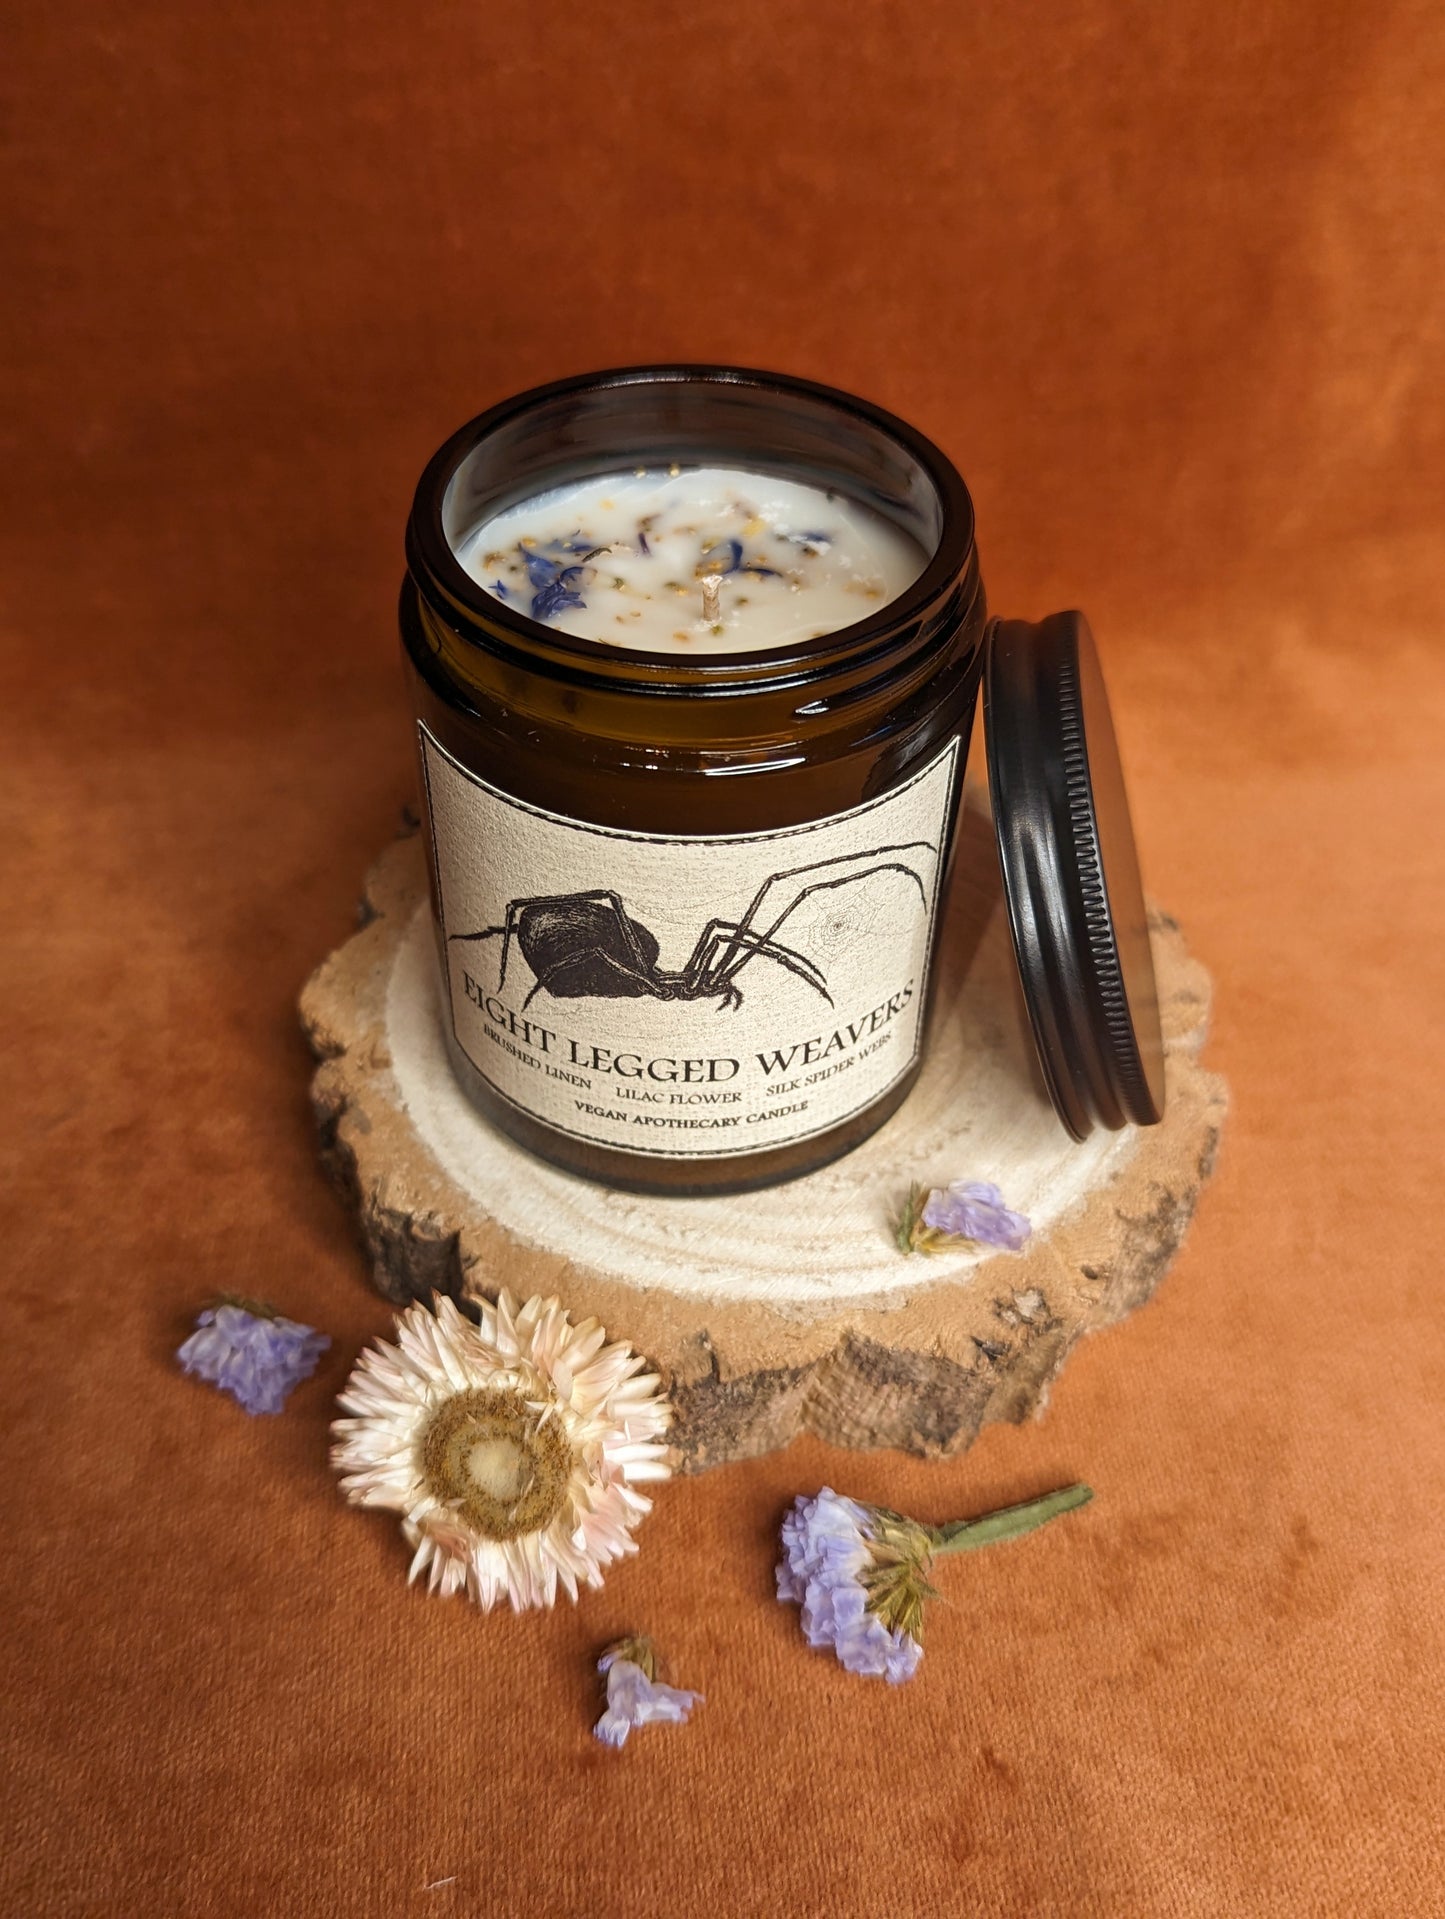 Single Wick Apothecary Candles: The Haunts Curiosity Shoppe